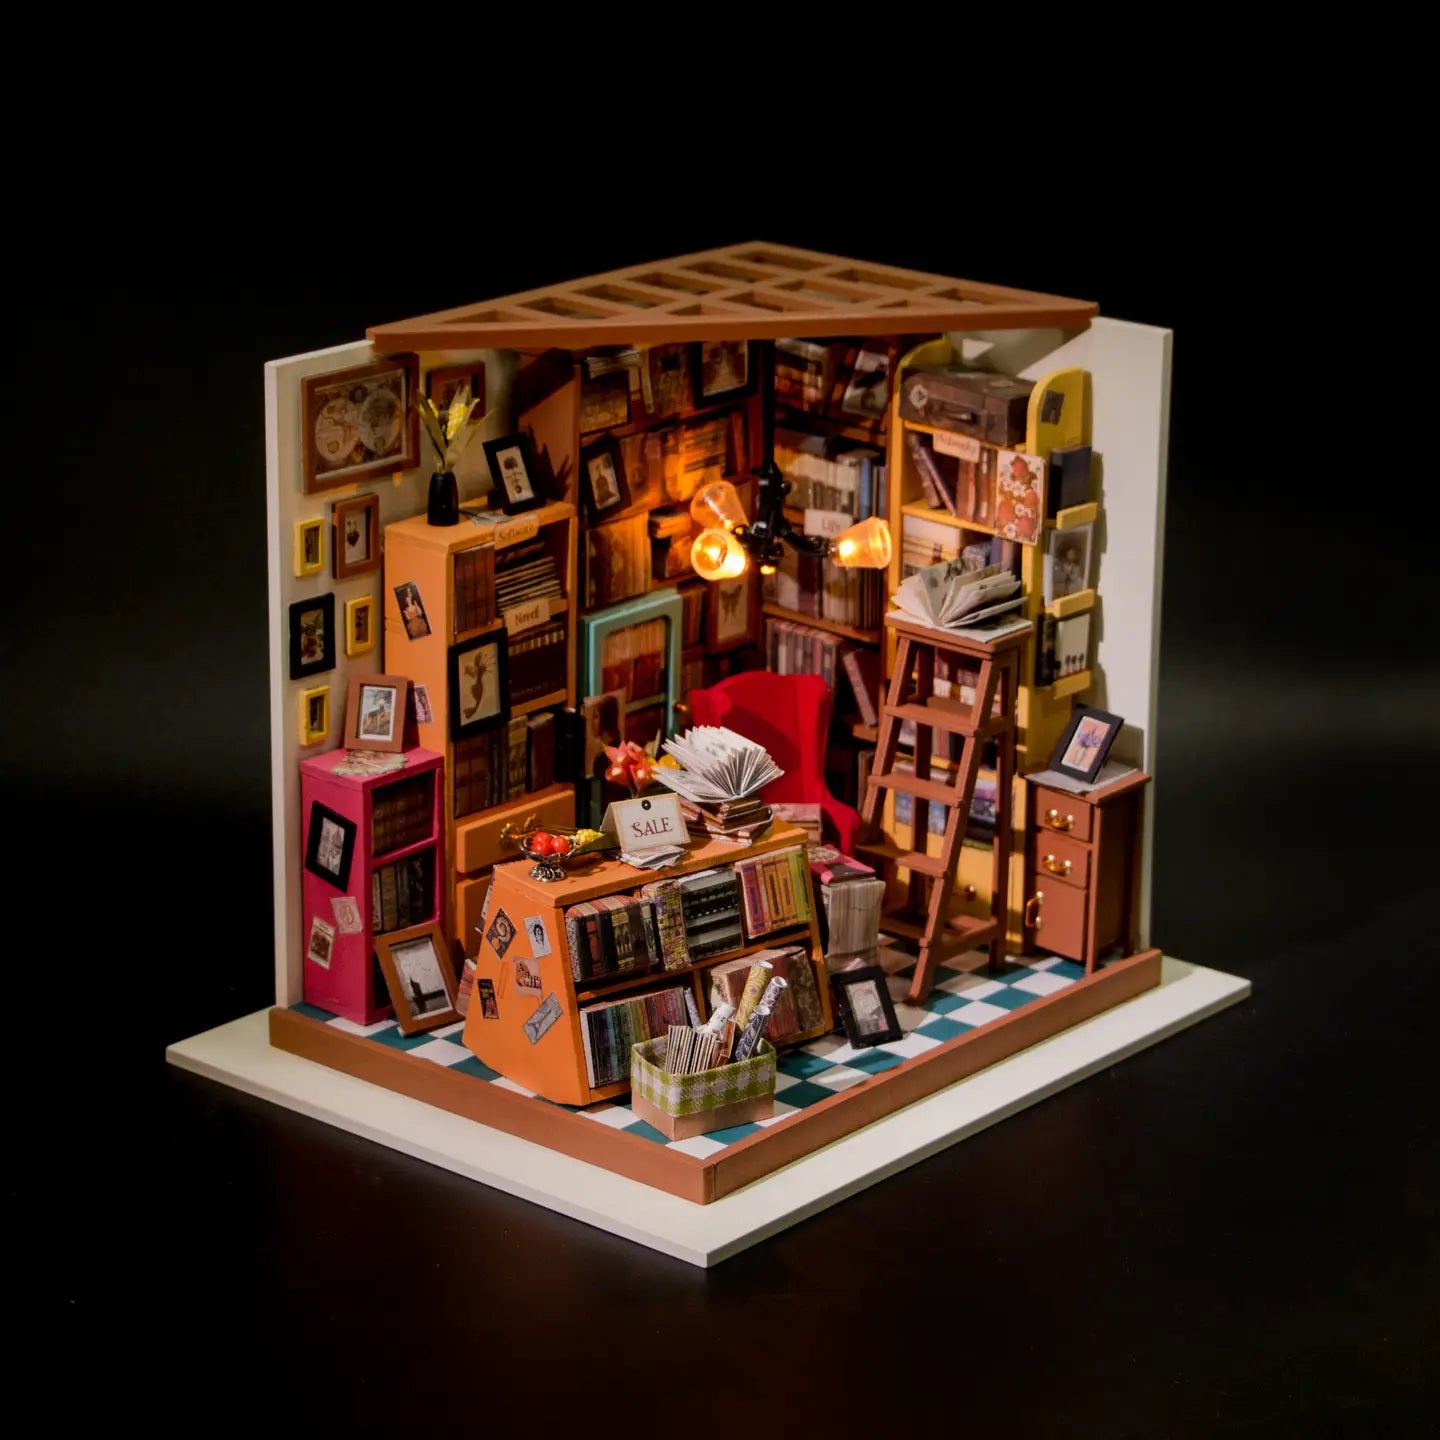 A miniature room with a lamp, bookshelves, a box of papers, and a ladder, embodying Sam's Study Rolife Library DIY Miniature Dollhouse from Strangecat Toys.